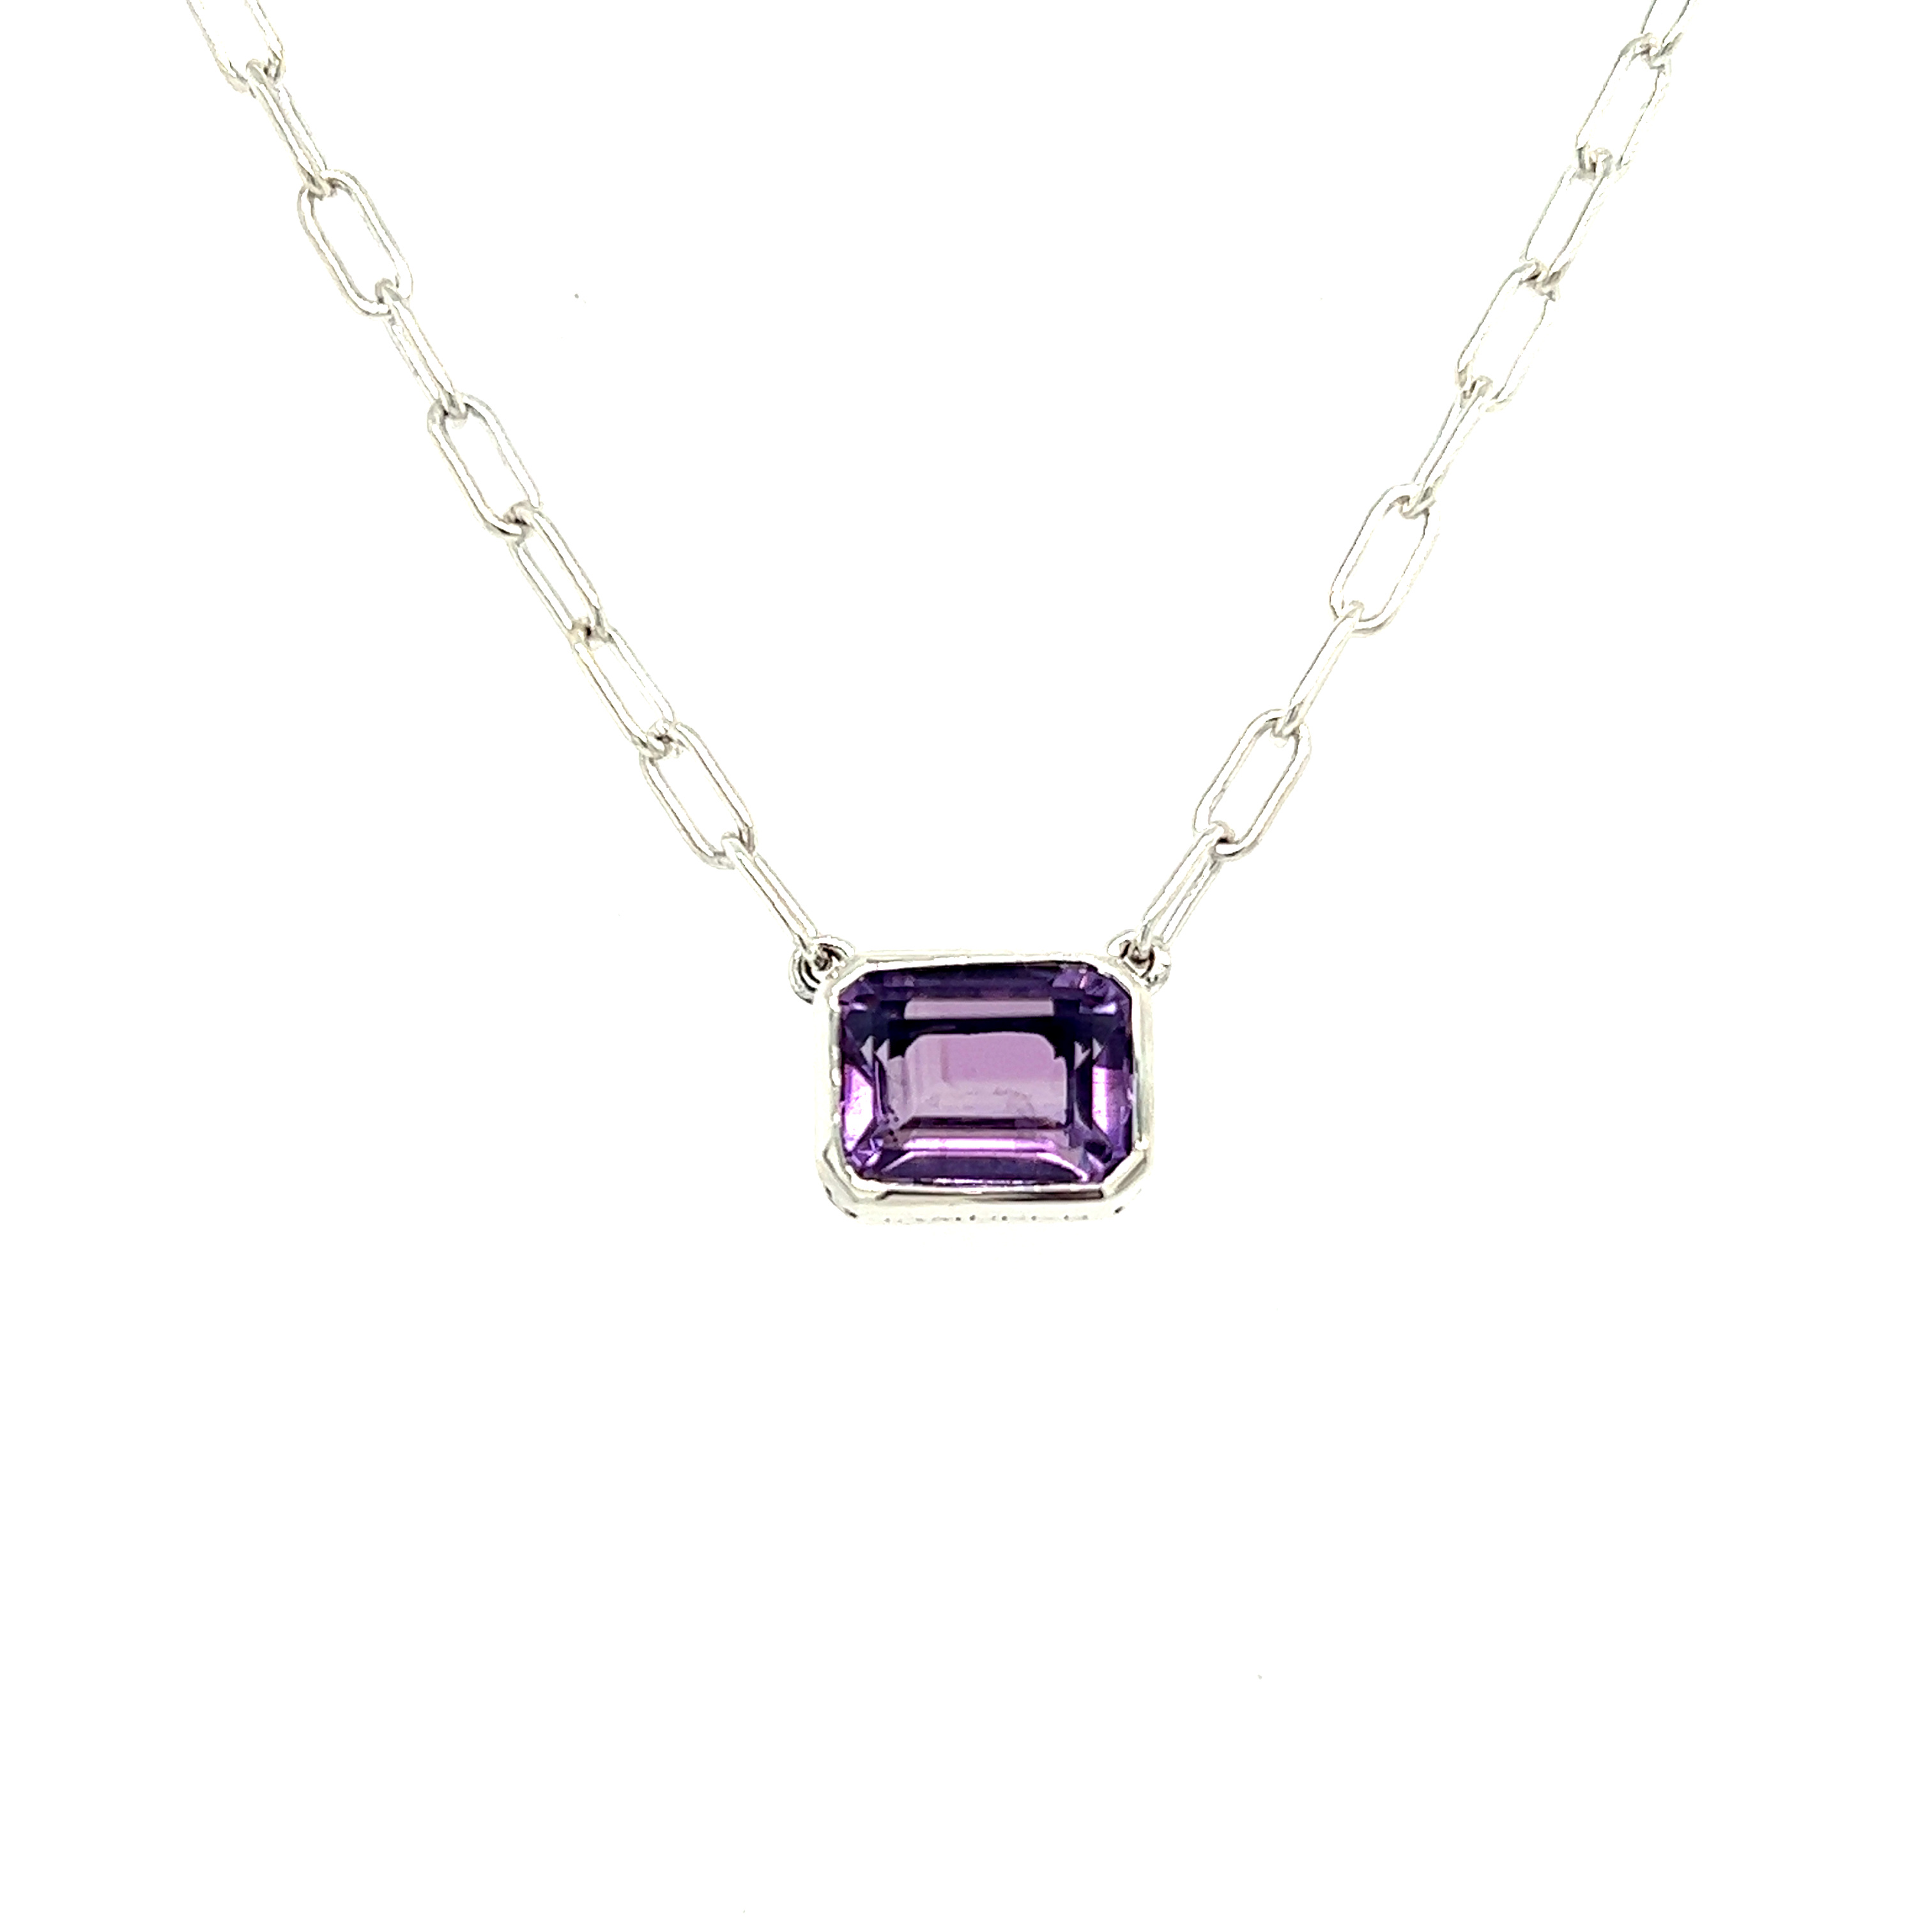 Sterling silver necklace with one bezel set emerald cut Amethyst.